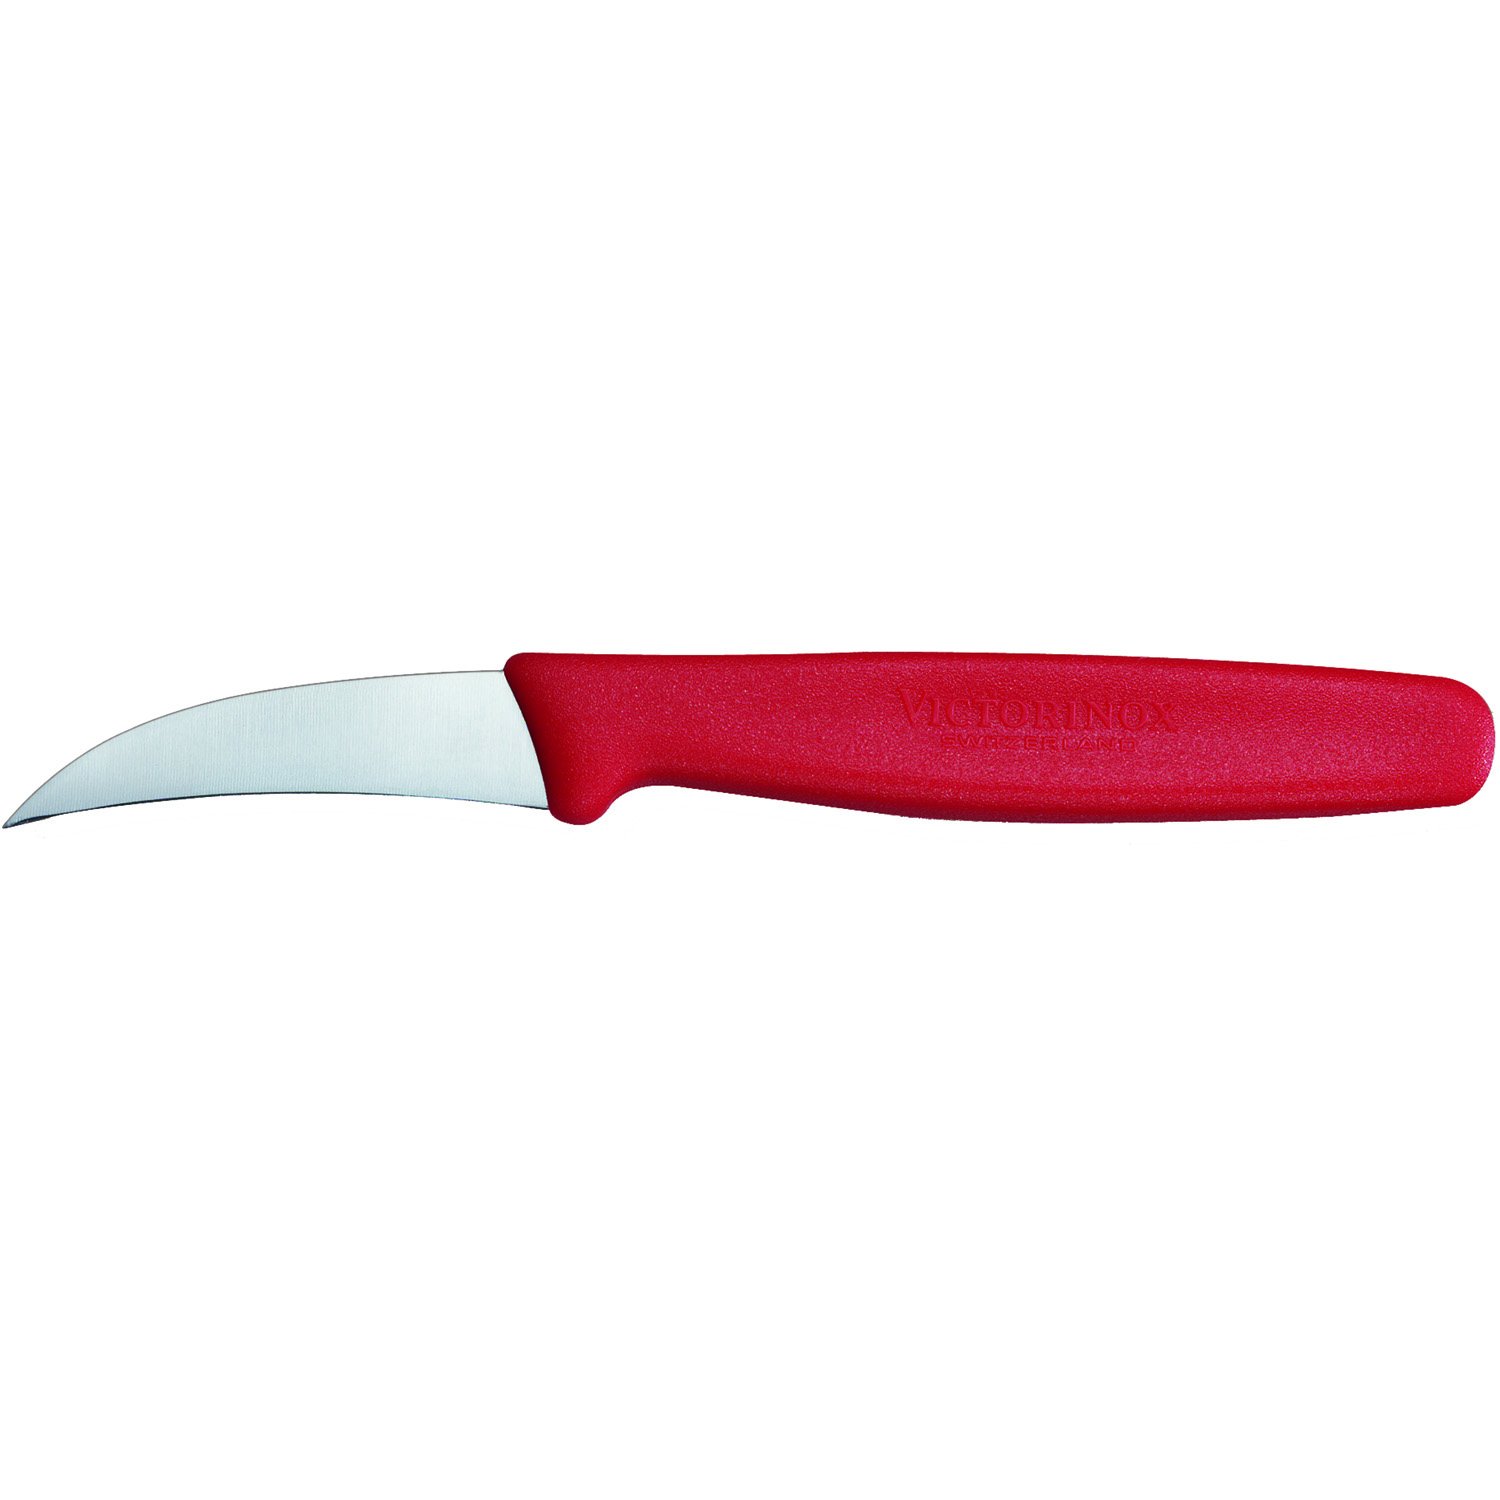 Victorinox - Shaping Knife Curved